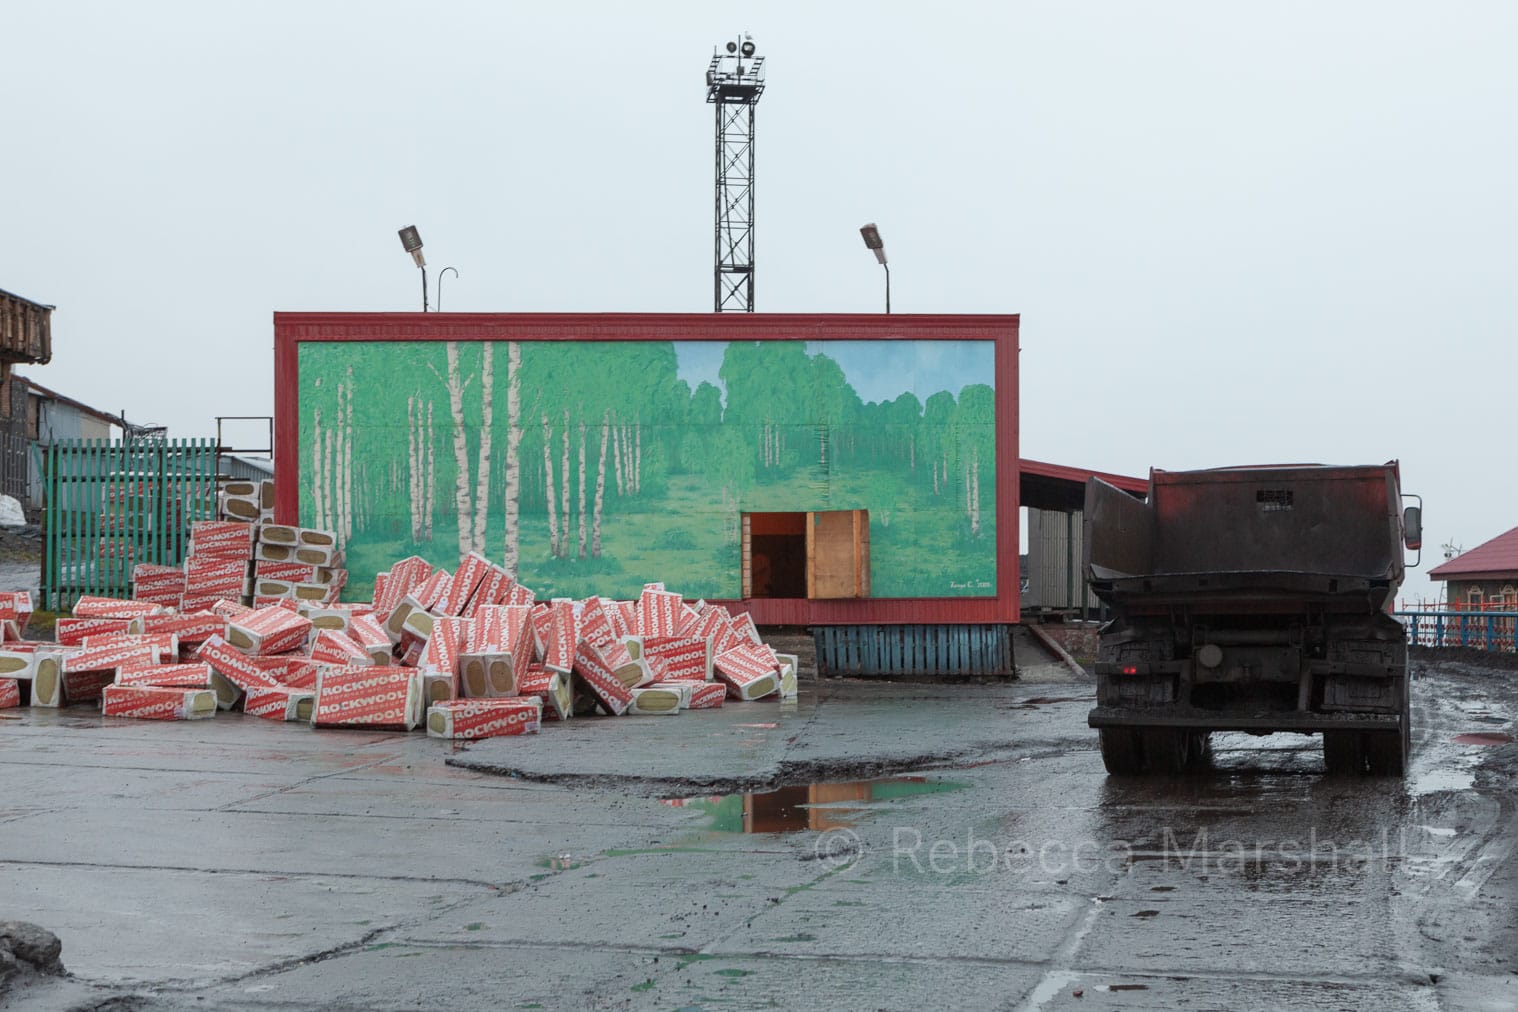 Photograph of a mural of a forest painted on an industrial building in a yard